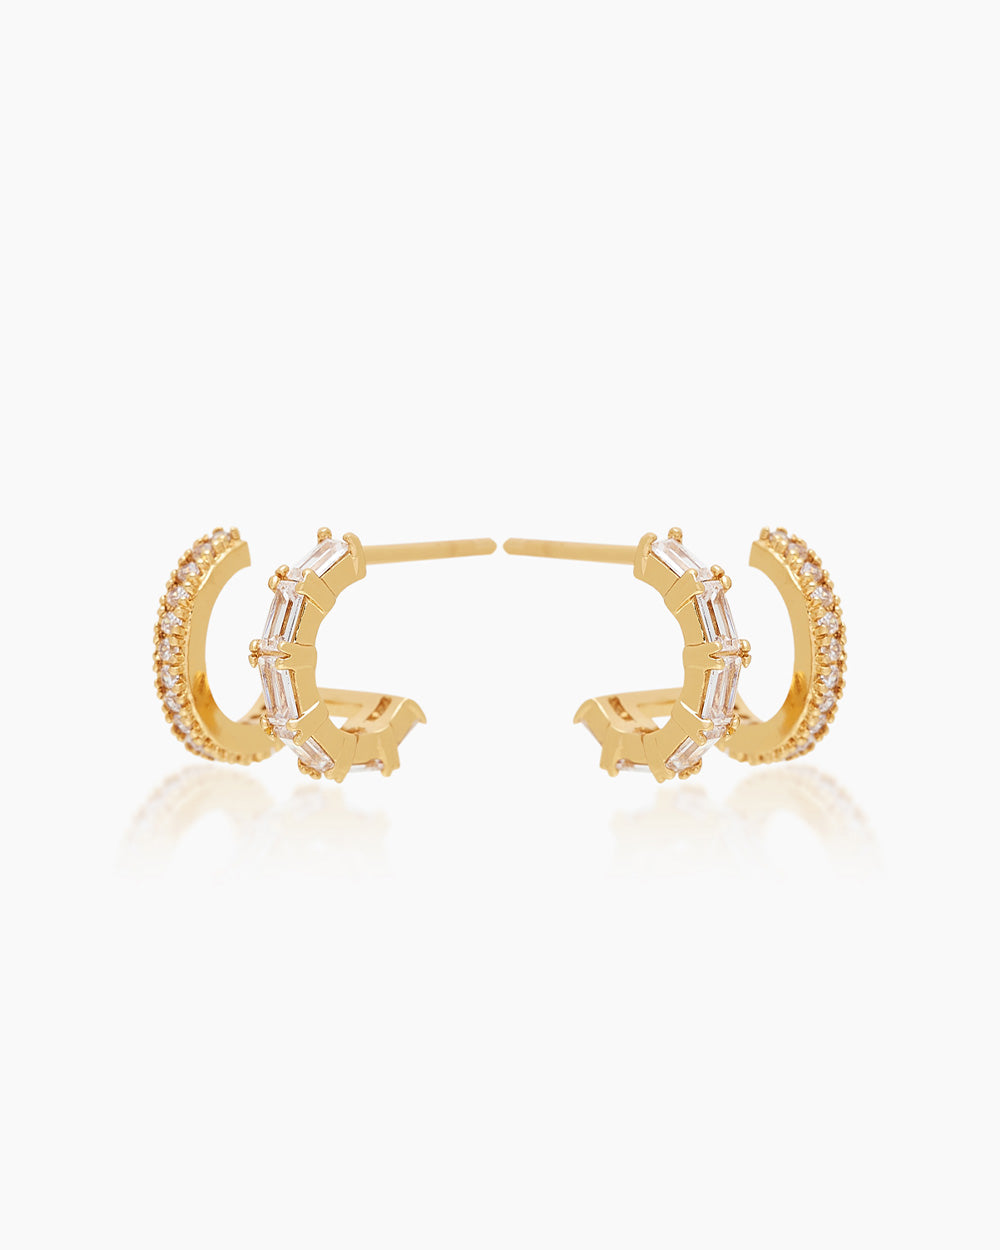 The Brooke Huggies, double stacked gold illusion earrings featuring both round cut and baguette cut cubic zirconia